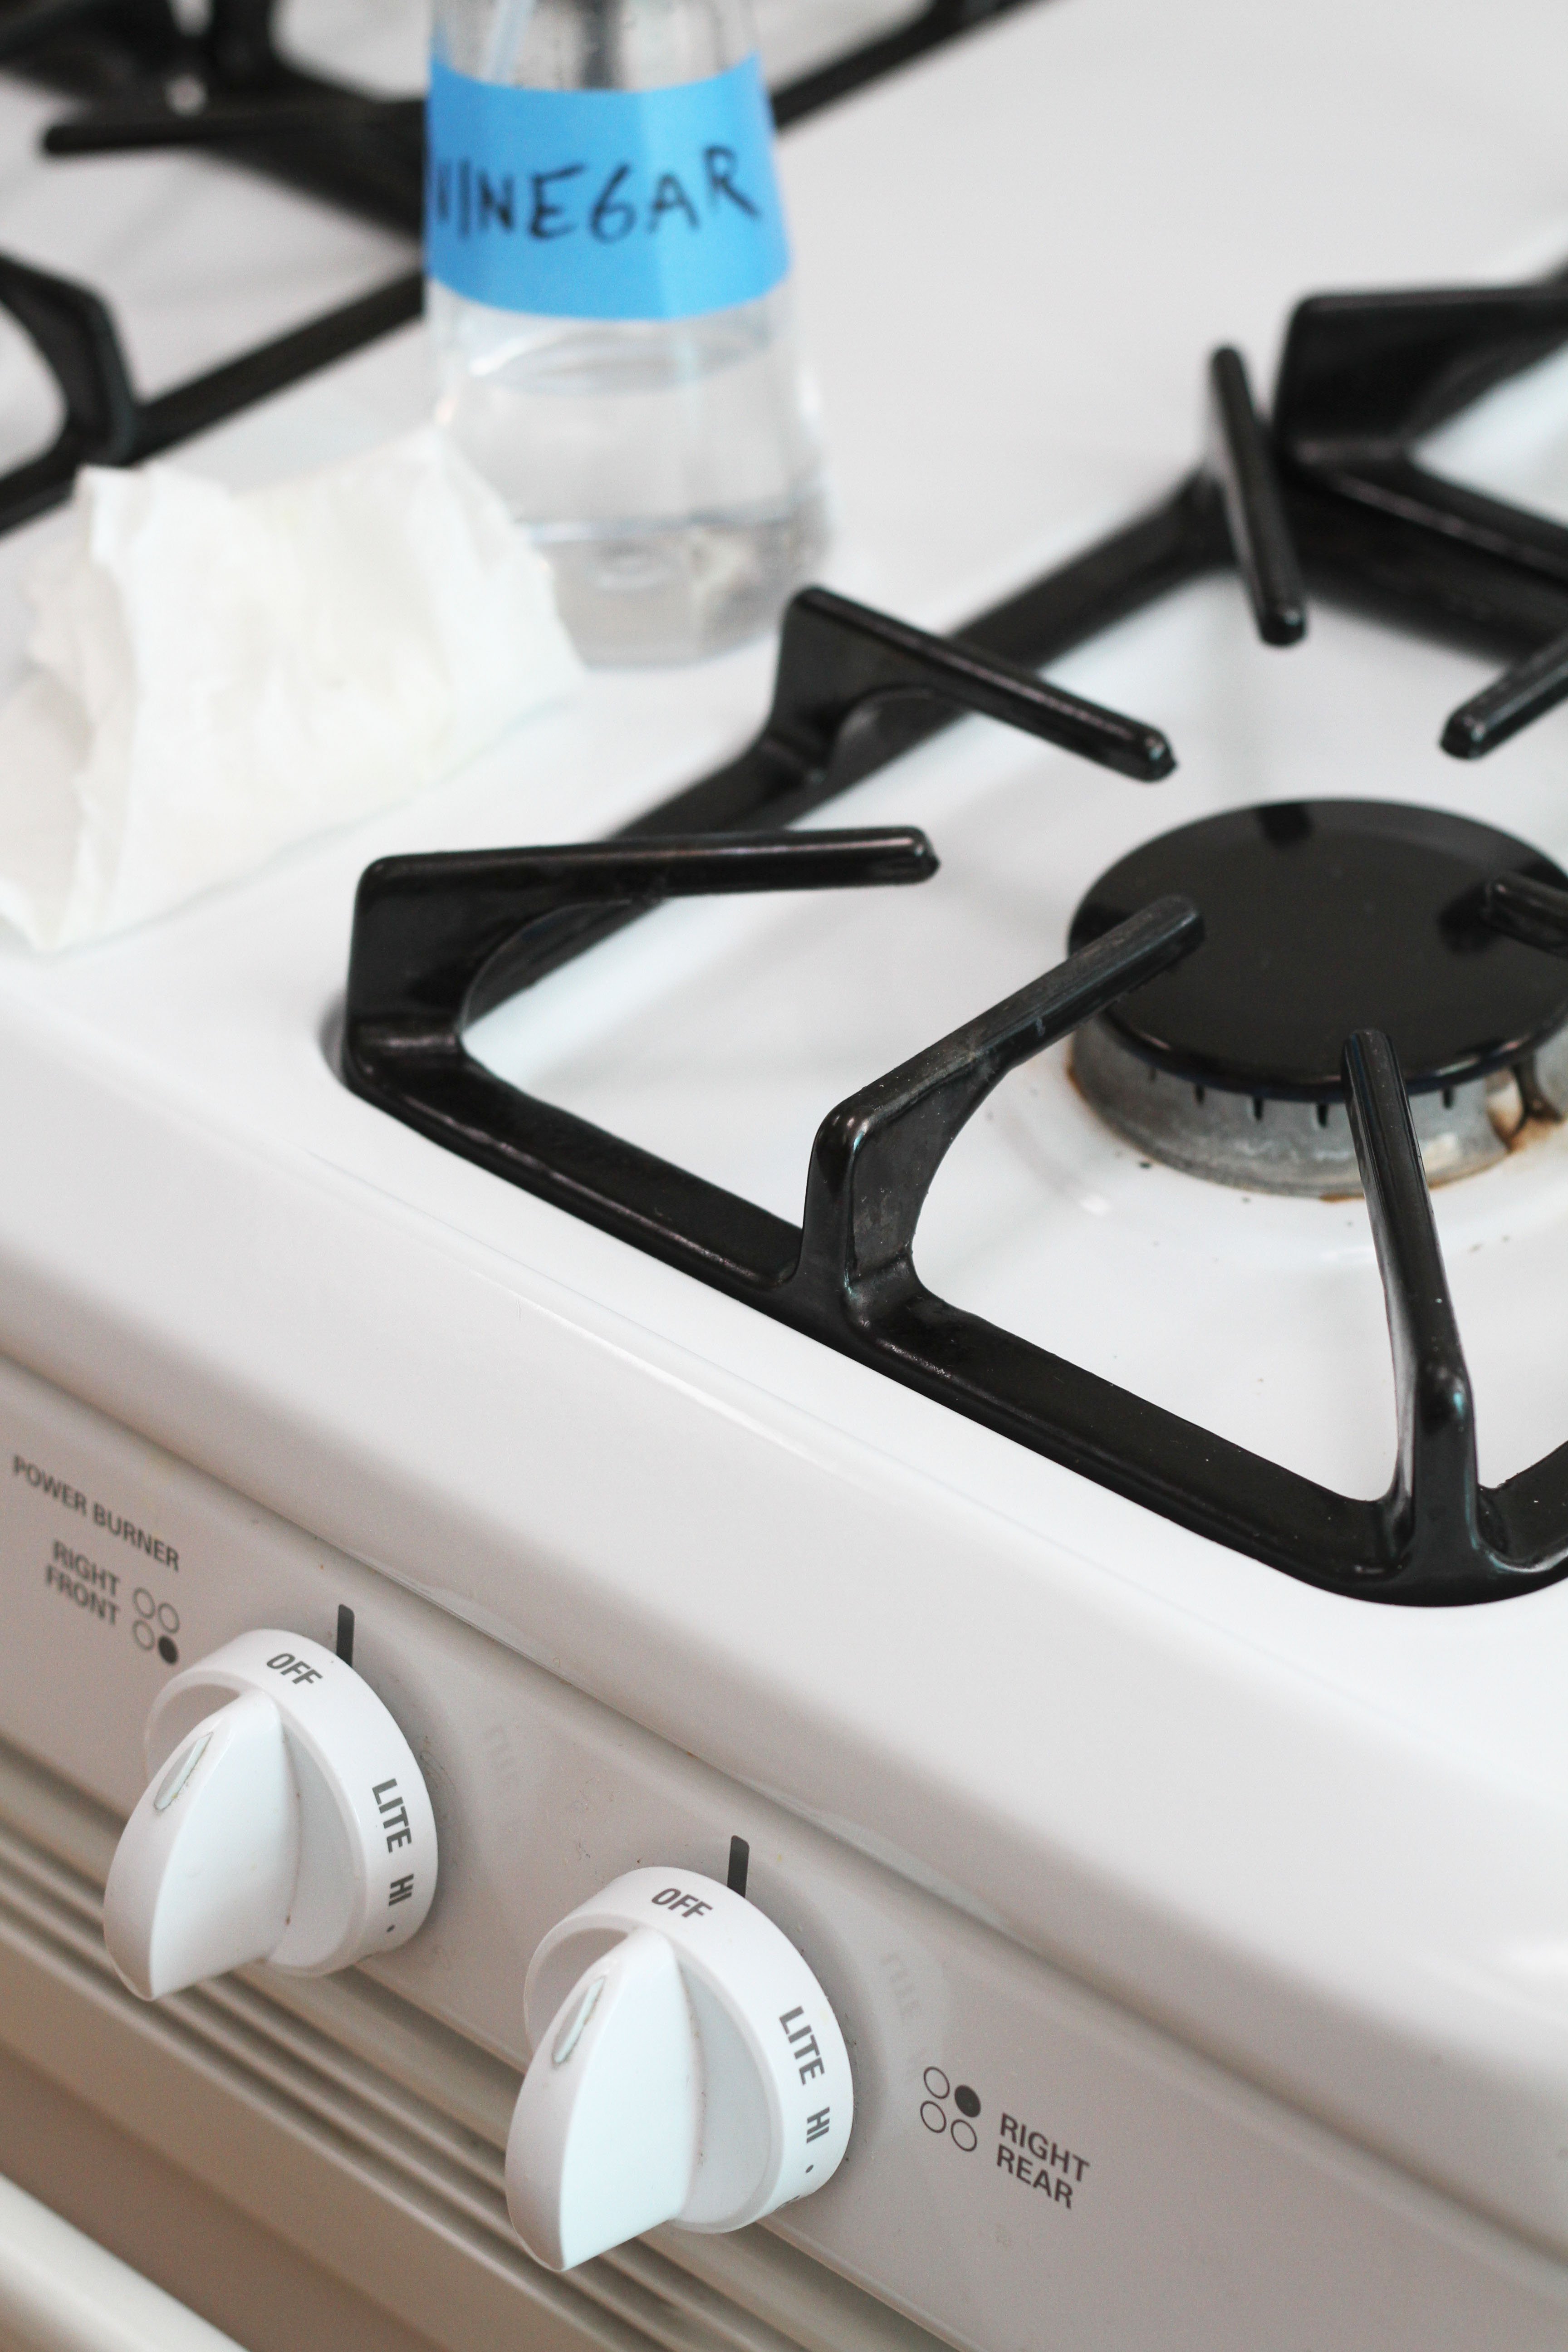 How to Clean a Stovetop